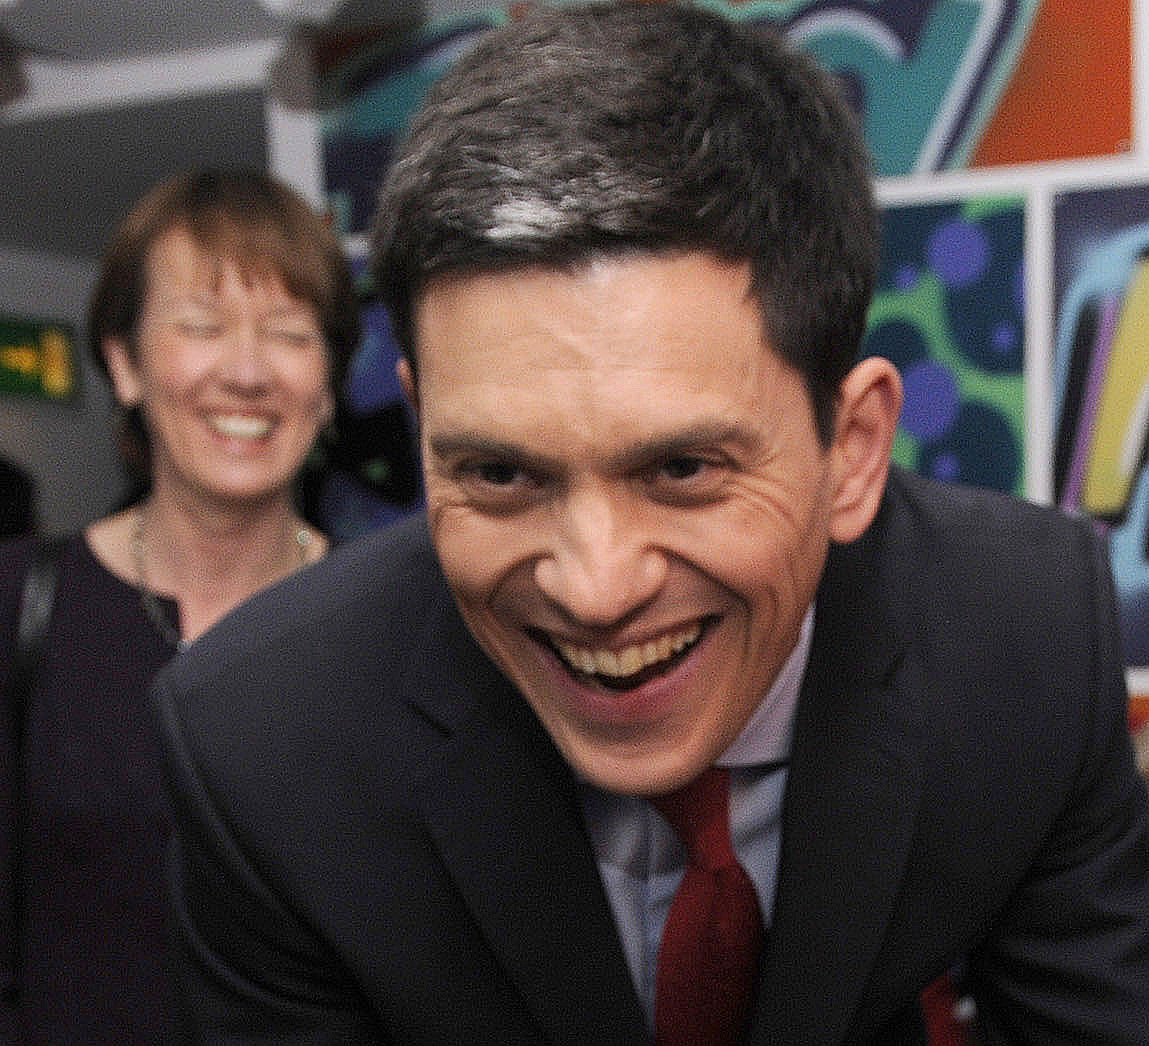 David Miliband leaders Ed Balls in a the Labour leadership contest finds a Channel 4 News poll of former MPs